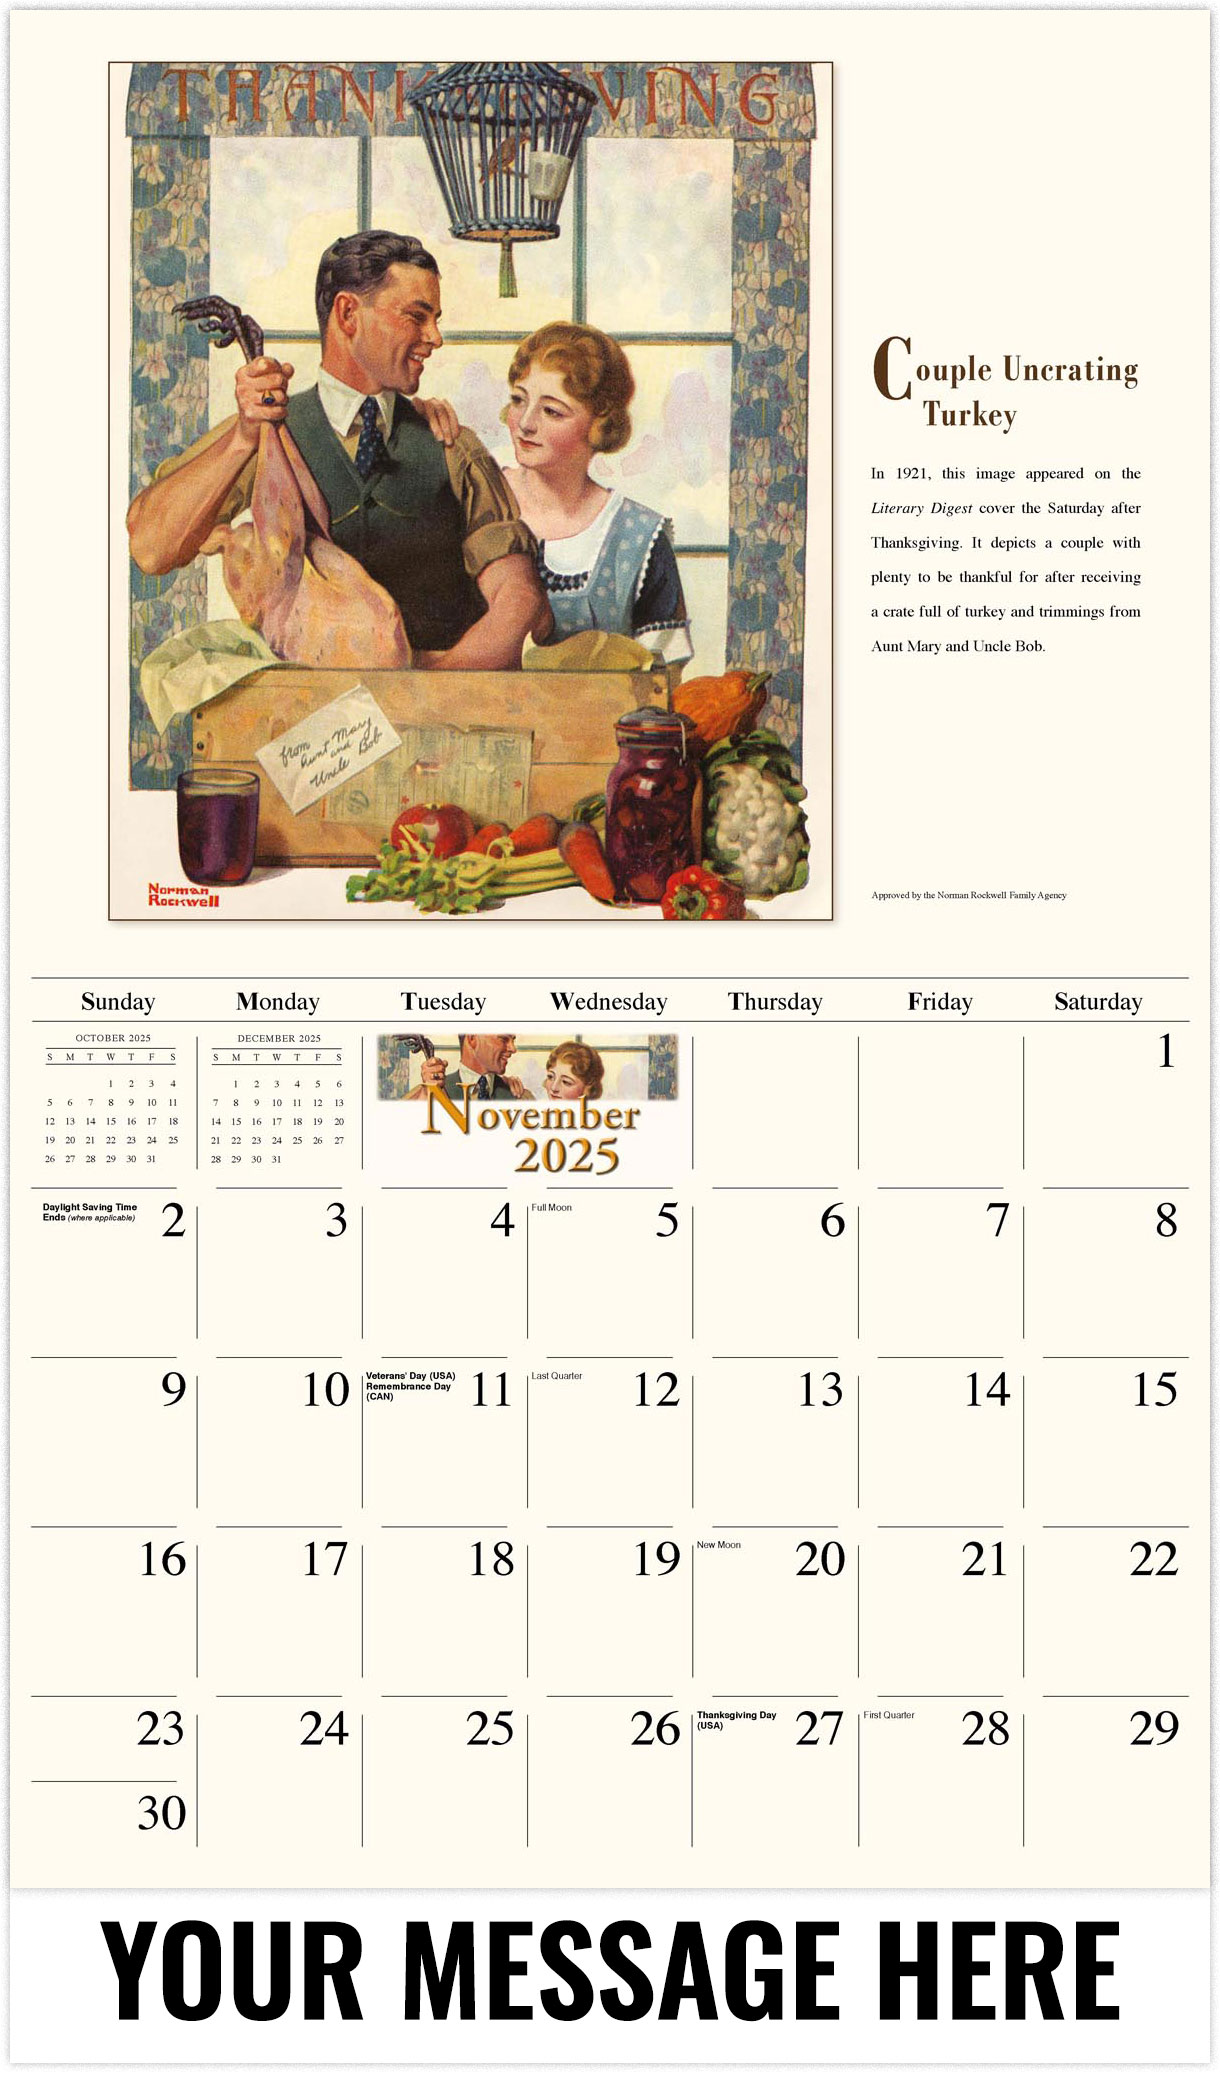 Galleria Memorable Images By Norman Rockwell - 2025